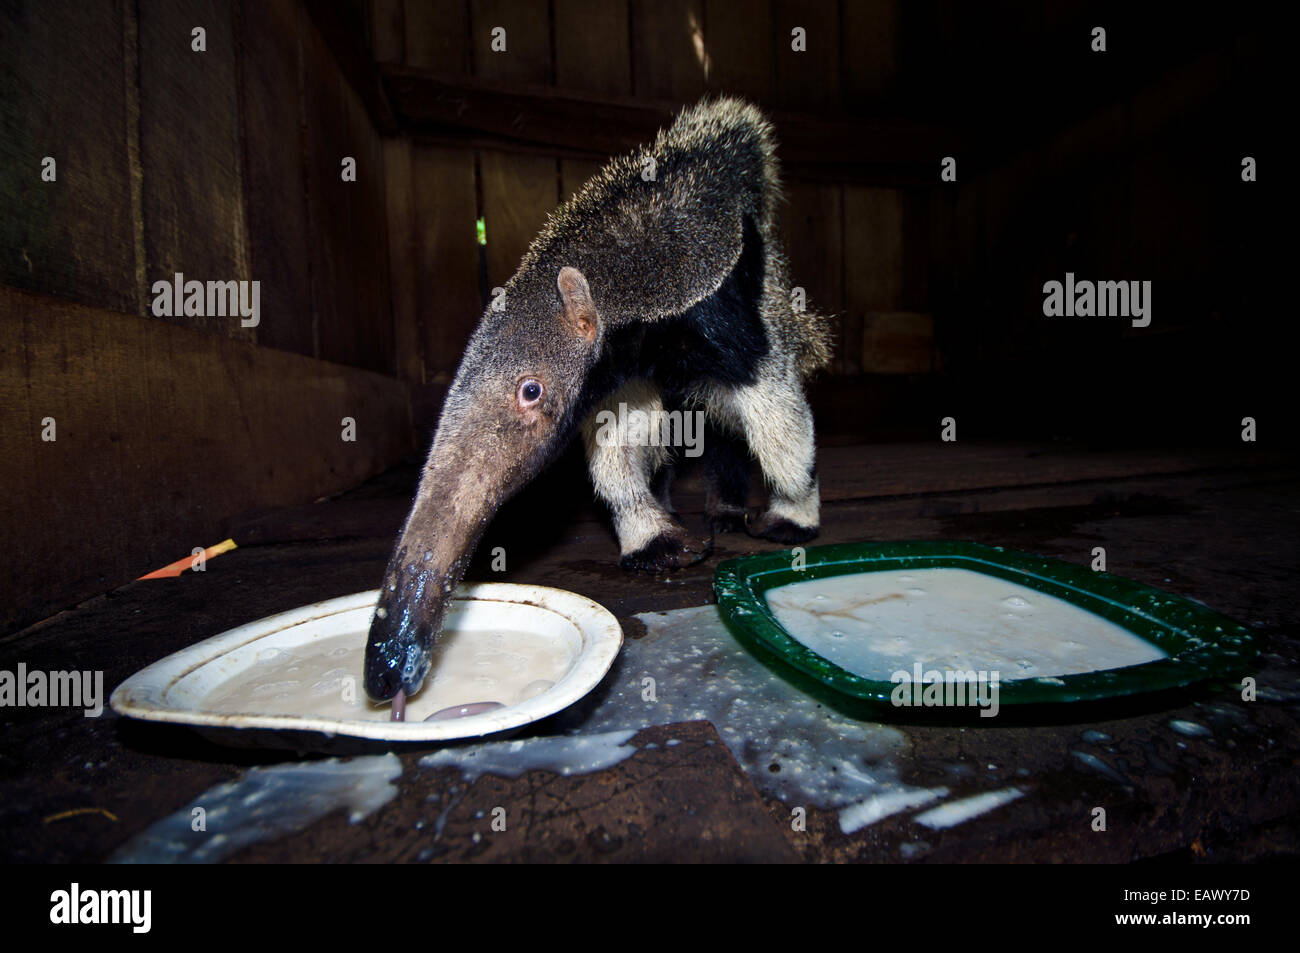 A Giant Anteater laps up an artificial diet in a wooden box after confiscation from poachers. Stock Photo